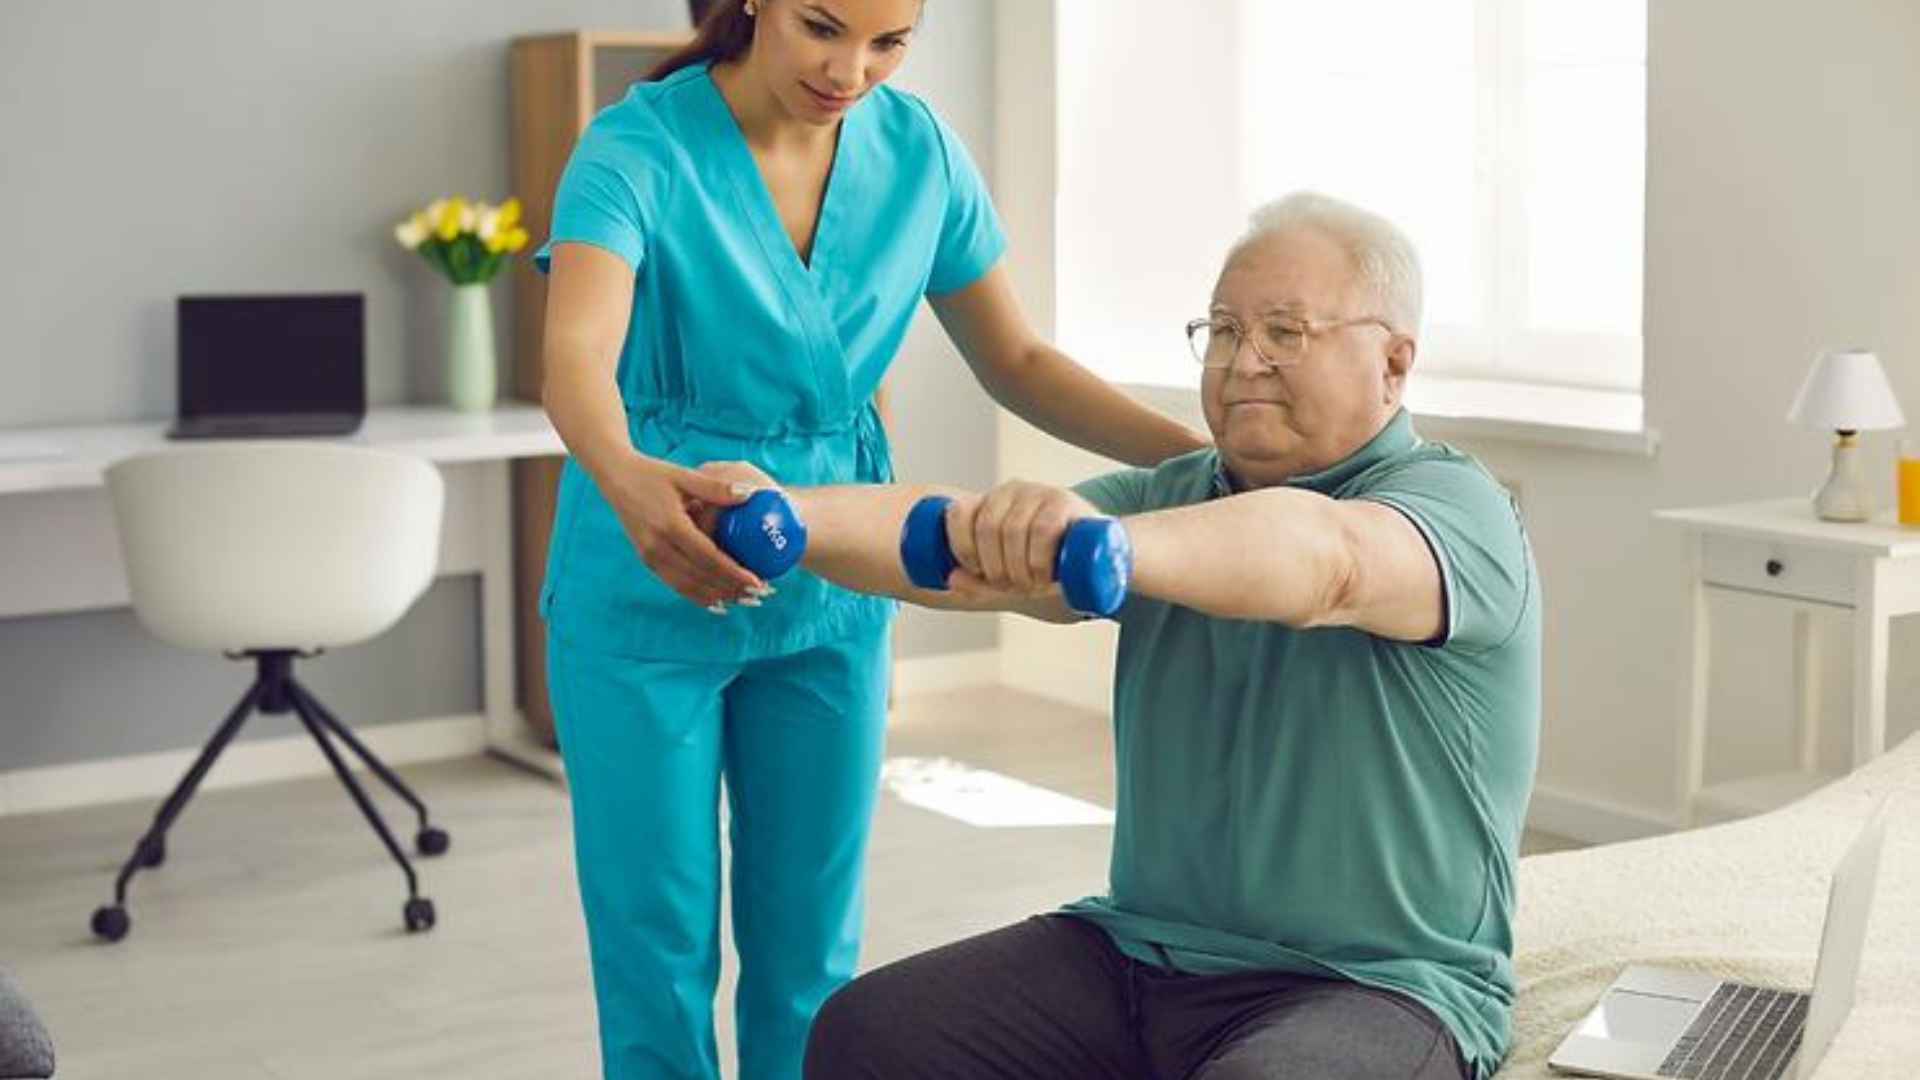 An older man sat on a bed with weights in his hands doing an exercise with his physio